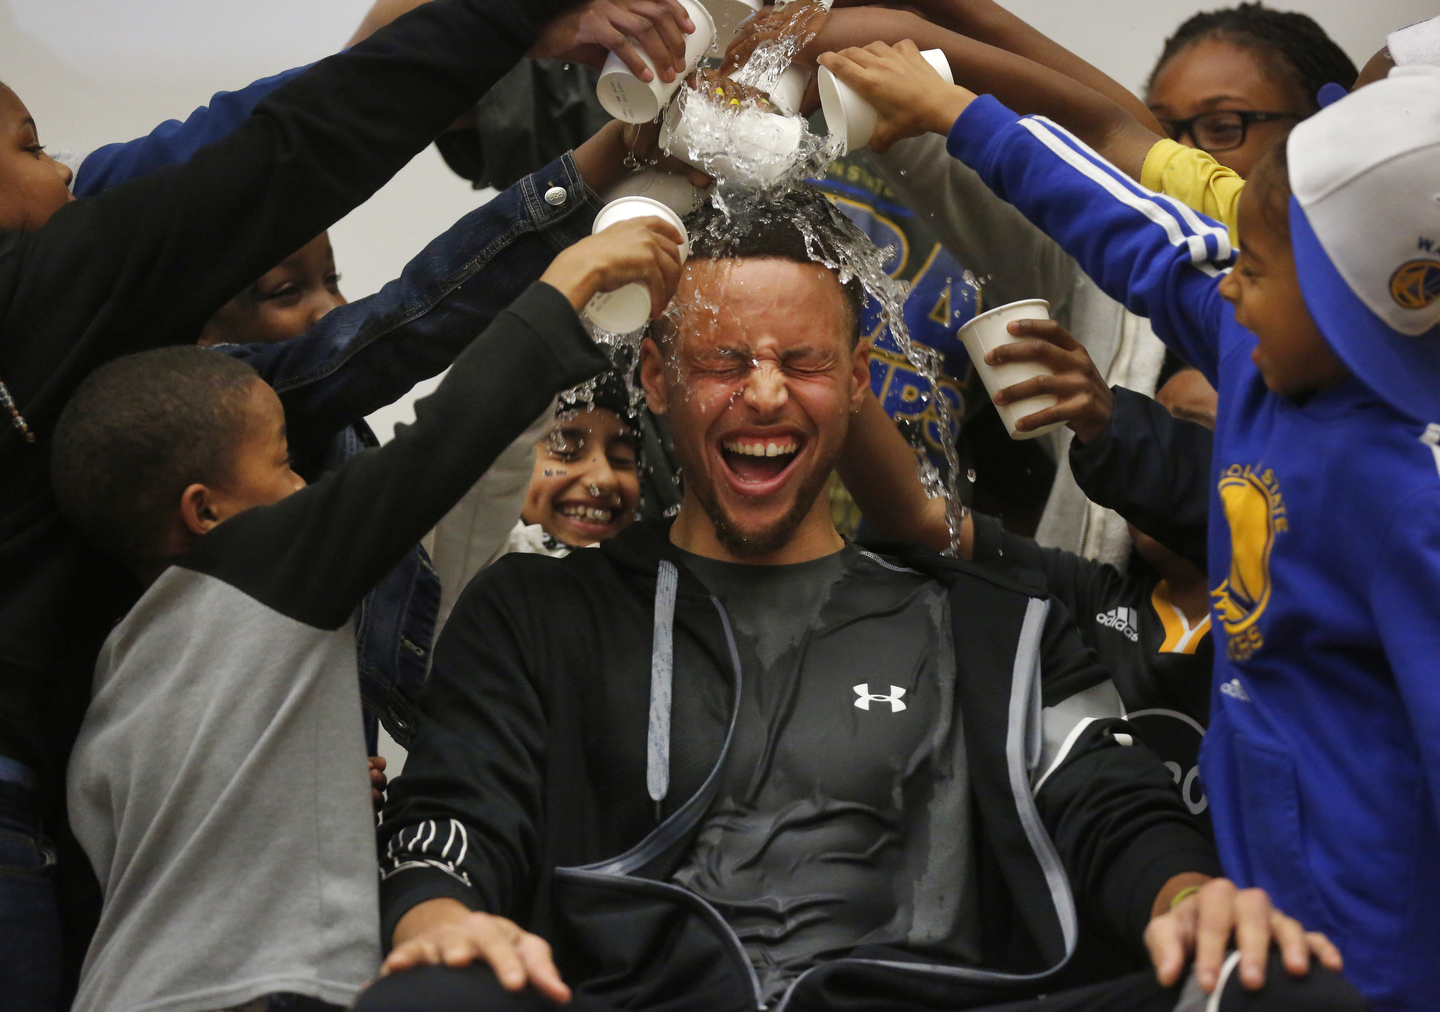 Students pour water onto Stephen Curry's head during an event at Martin Luther King Jr. Elementary School wherein Curry promoted drinking water and healthy eating in partnership with his sponsor Brita March 8, 2016 in Oakland, Calif.